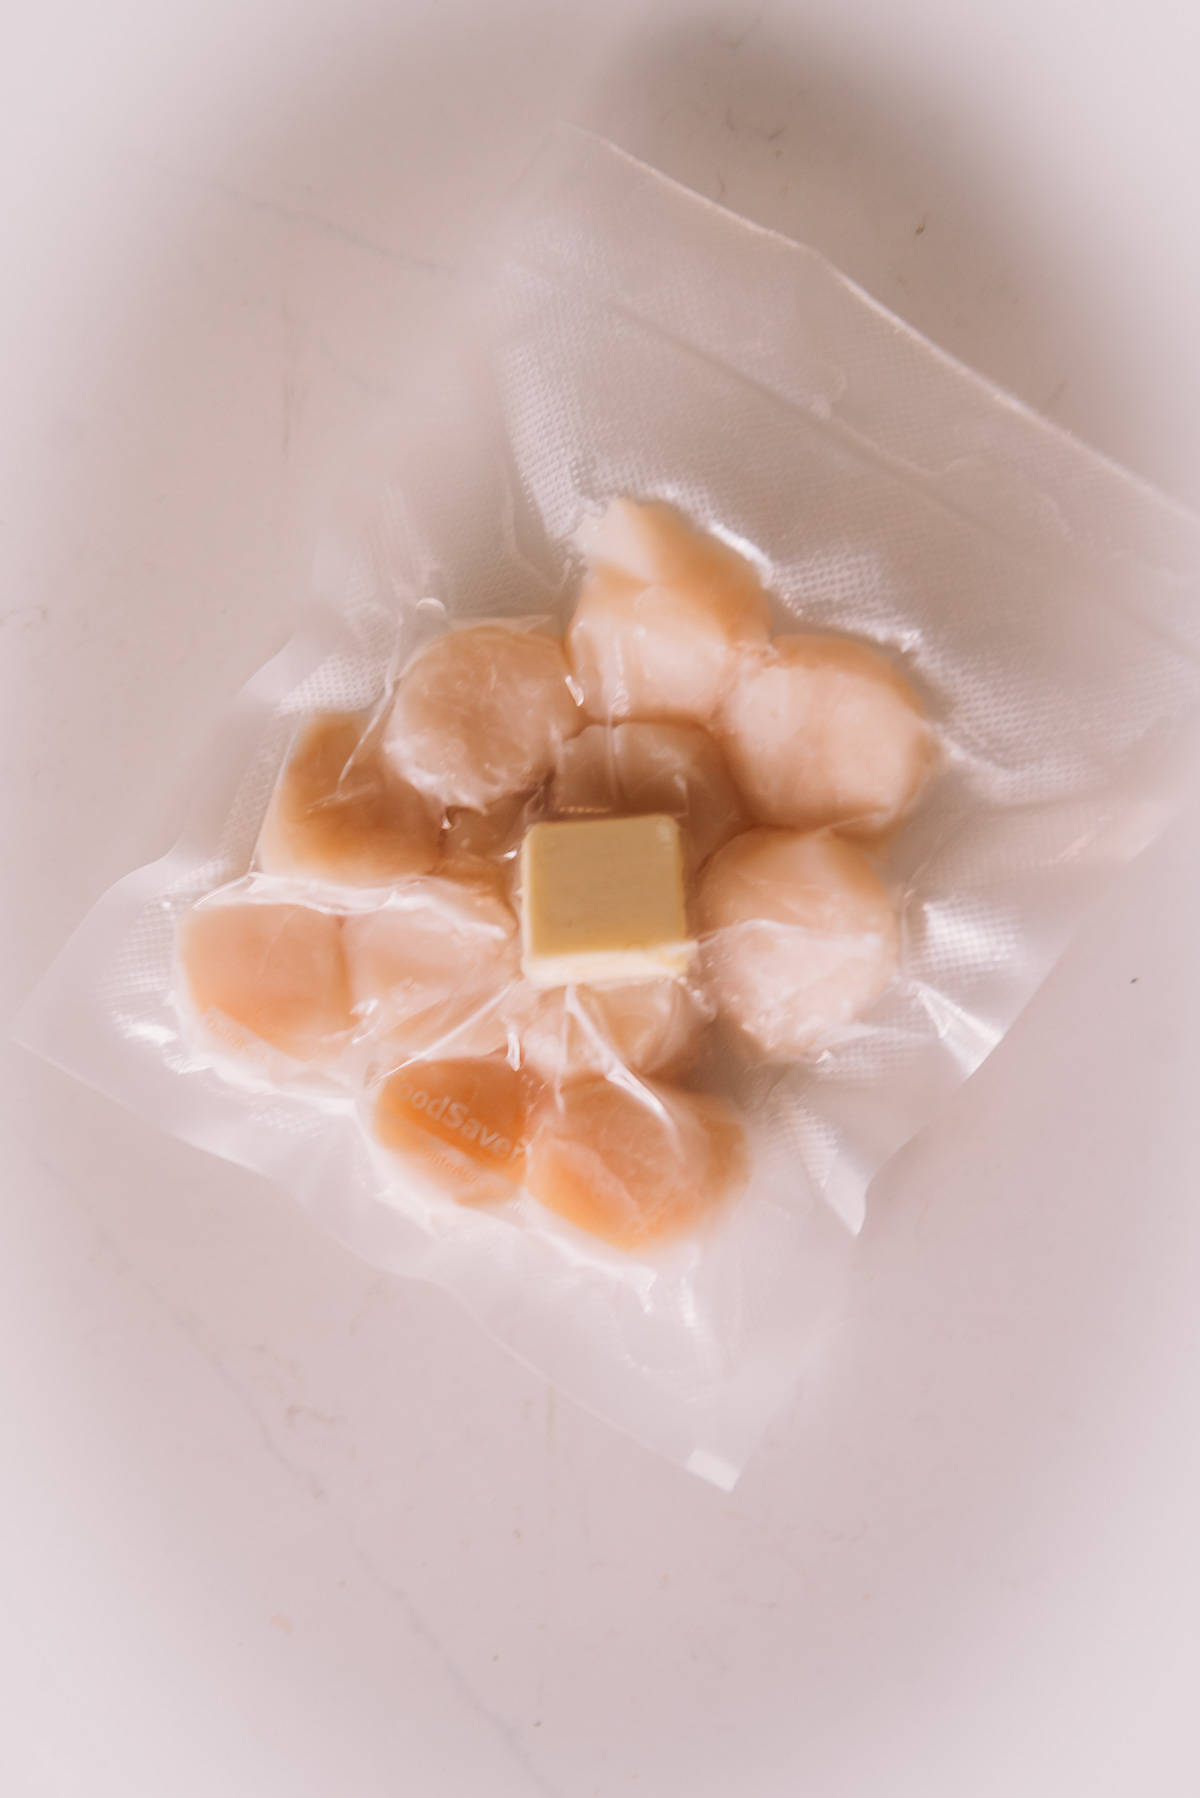 A vacuum sealed bag of sea scallops with a piece of butter in it.